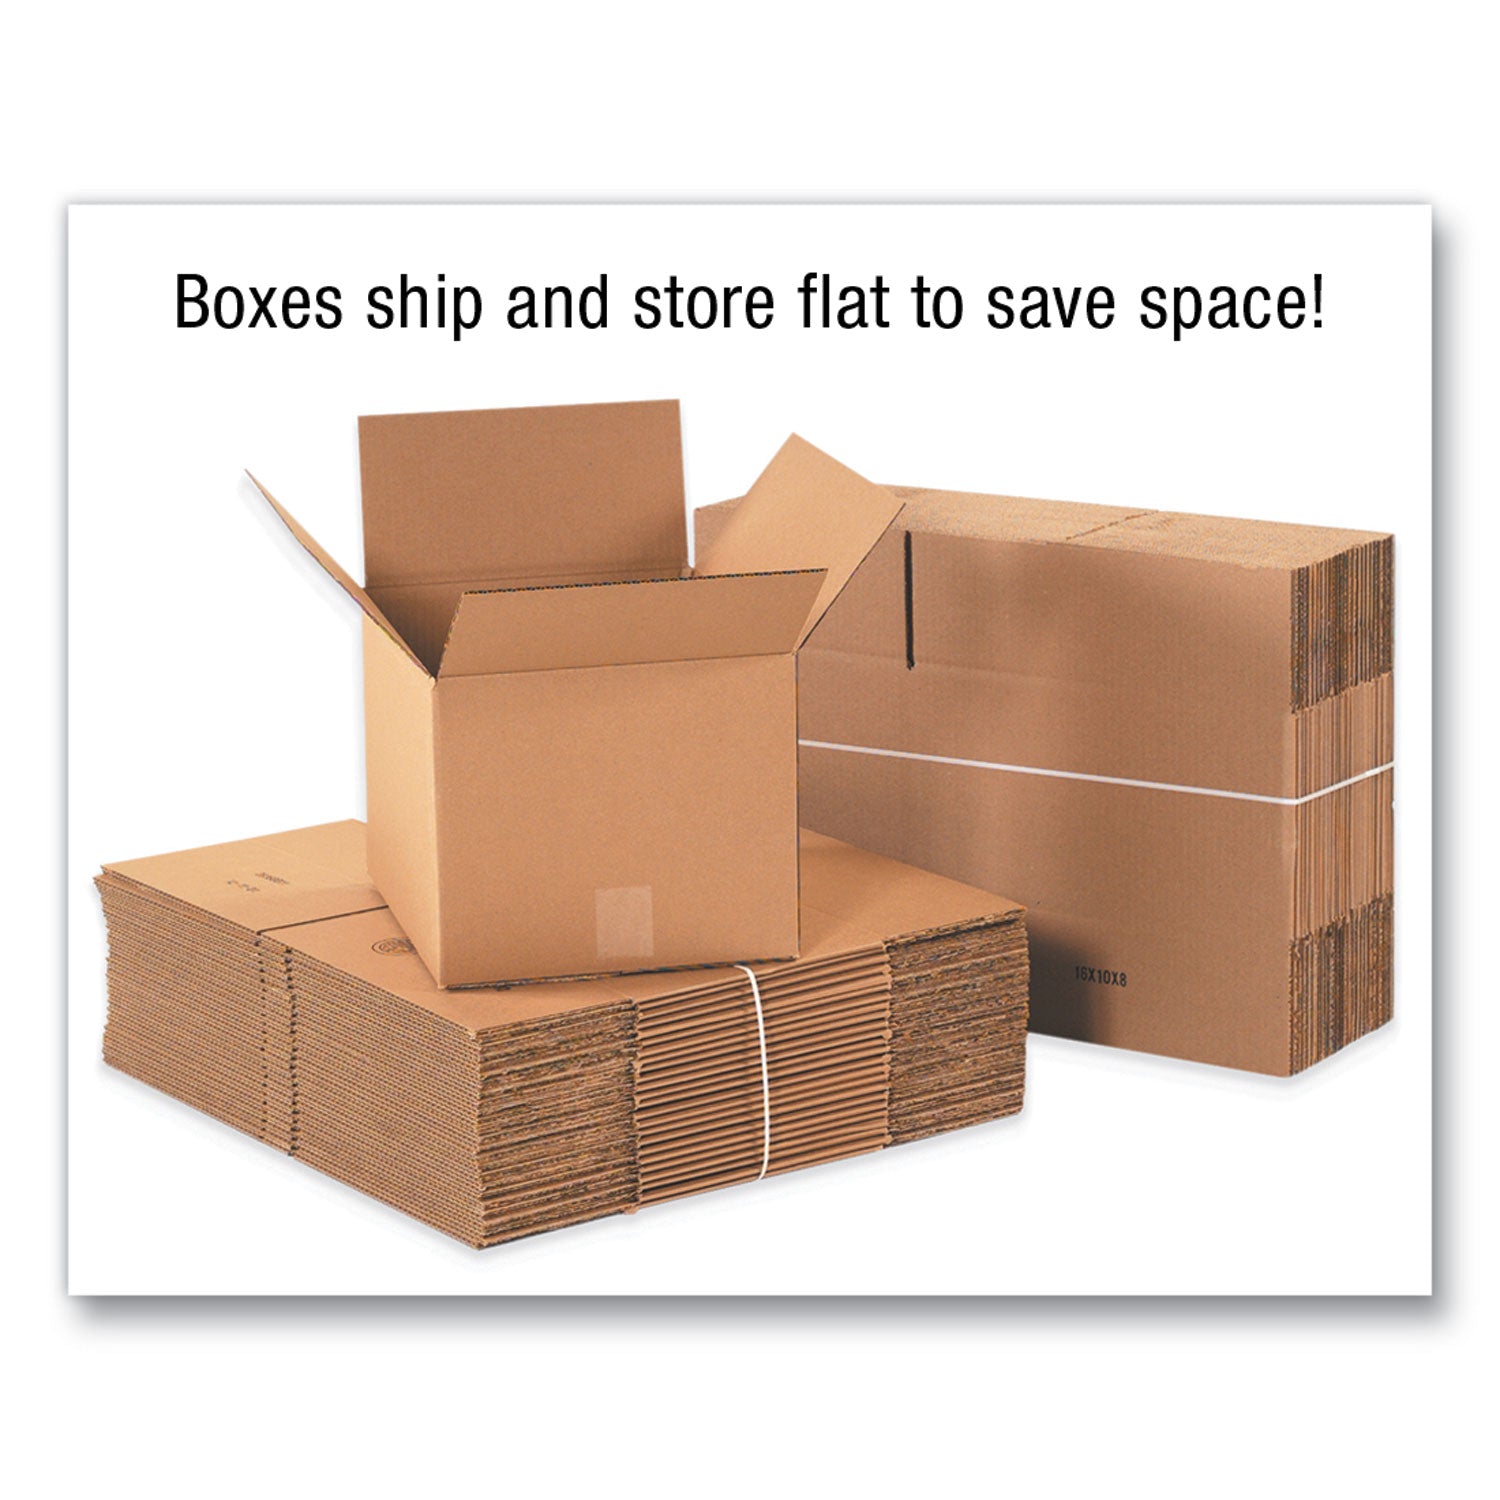 fixed-depth-shipping-boxes-regular-slotted-container-rsc-12-x-16-x-12-brown-kraft-25-bundle_cwz161212 - 3